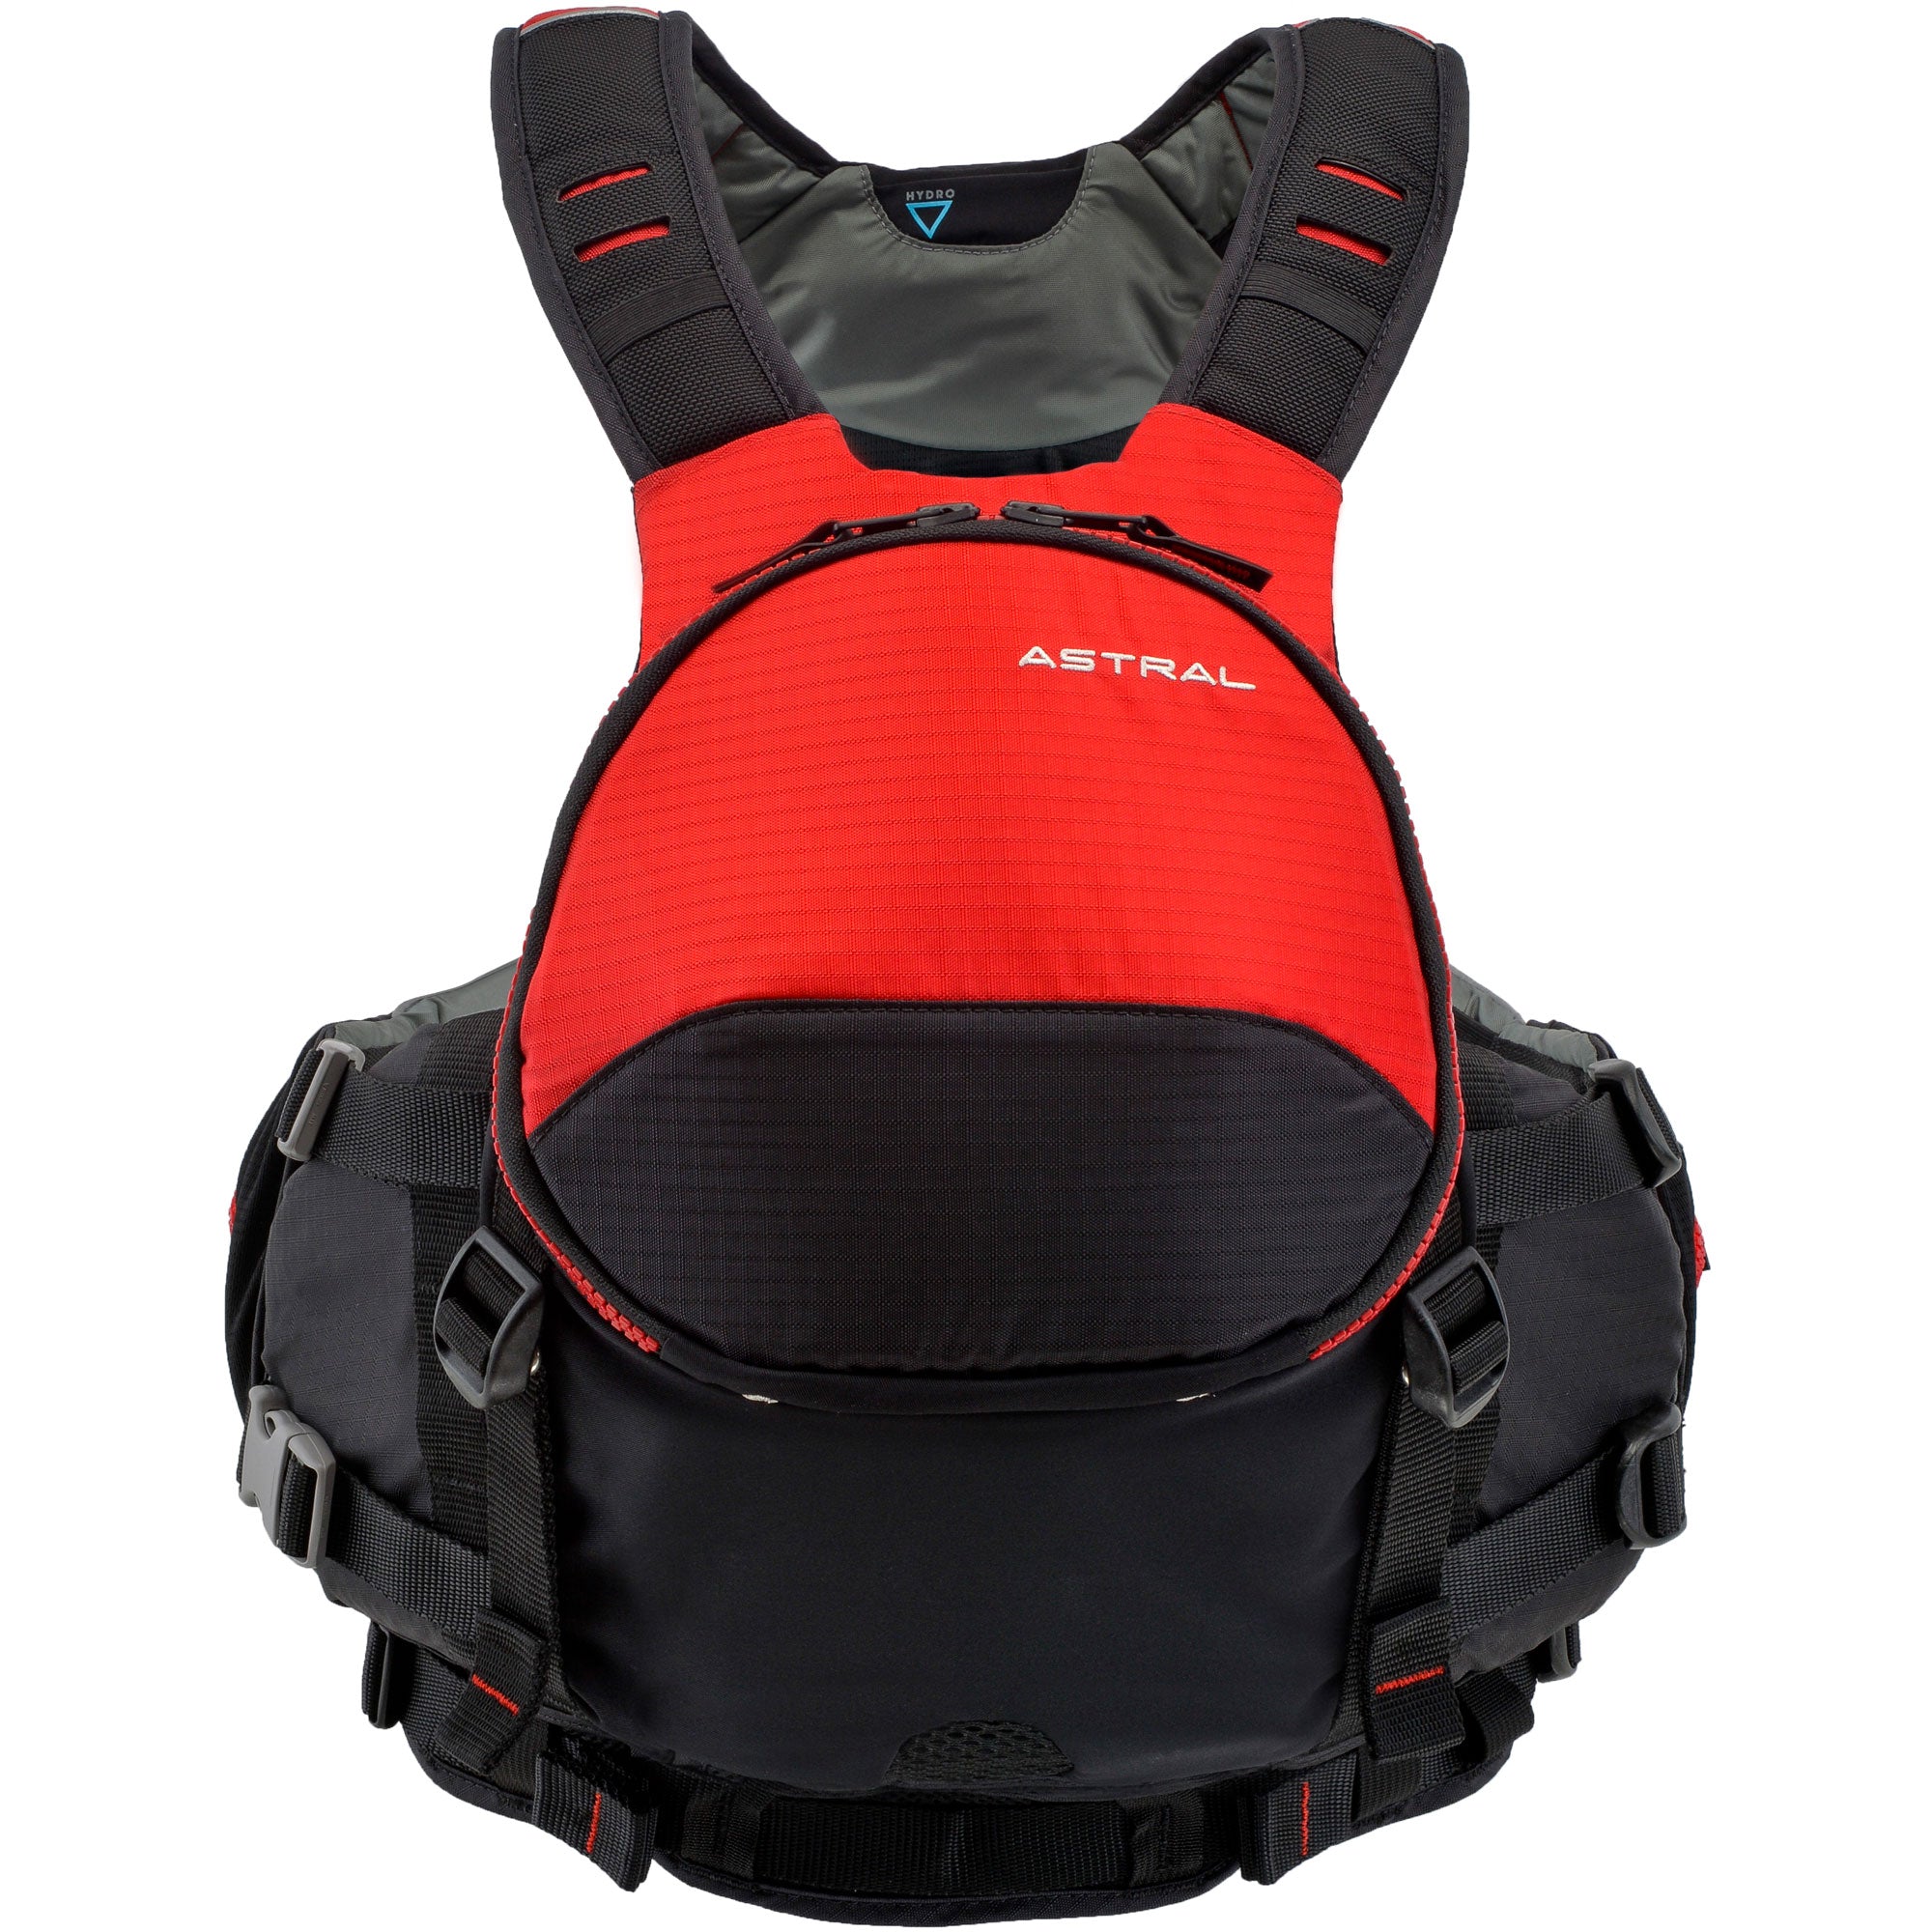 Astral Bluejacket PFD - S/M / Cherry Creek Red